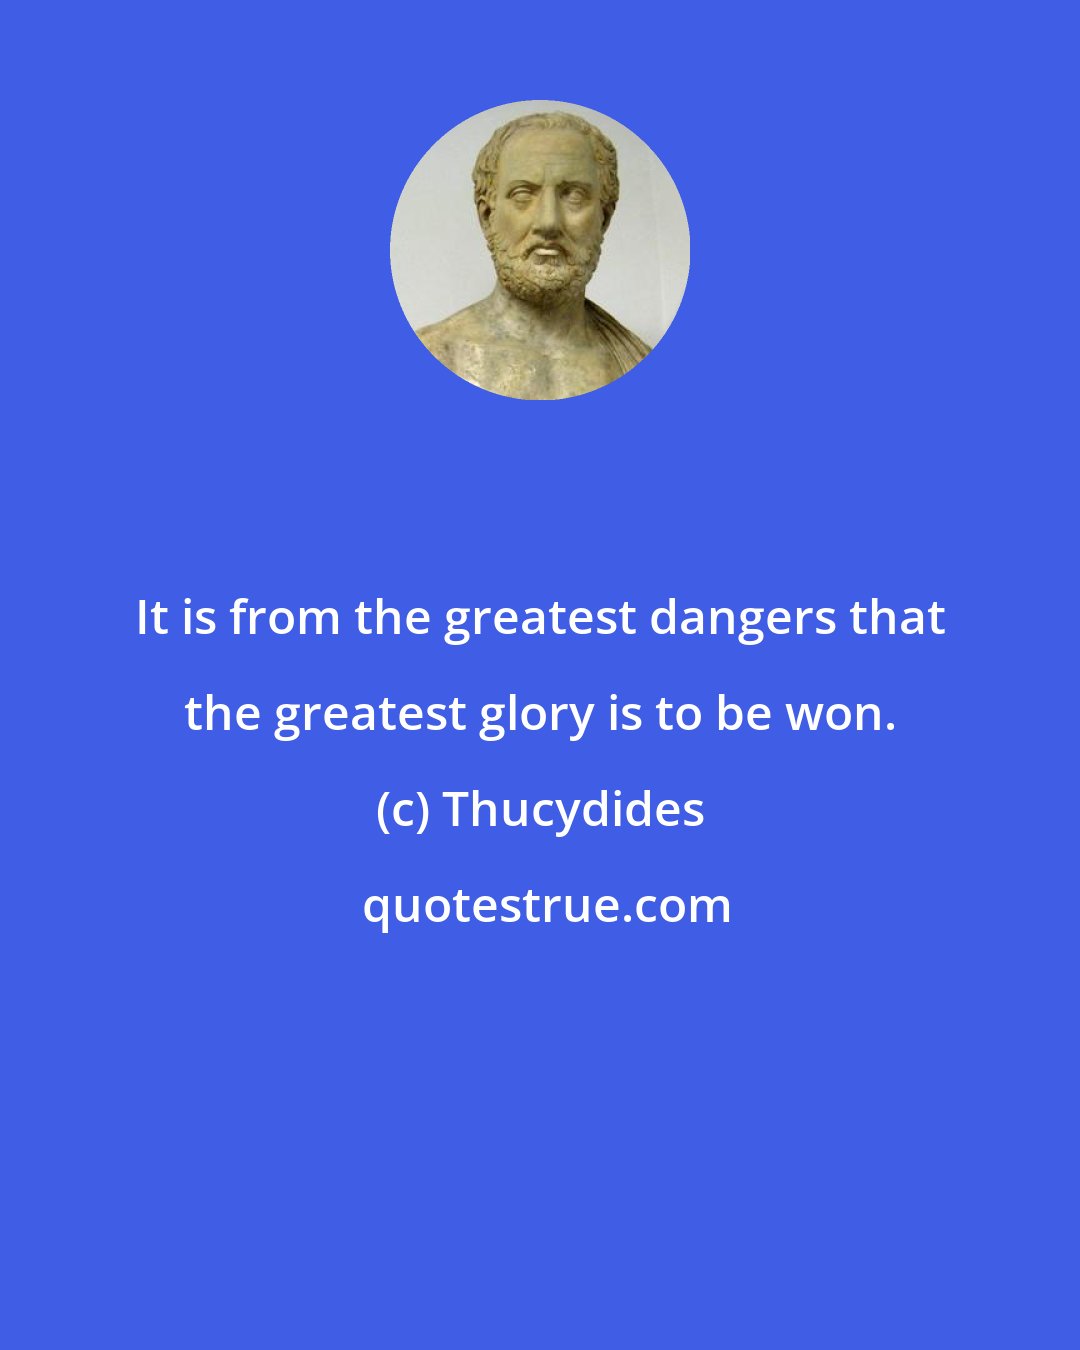 Thucydides: It is from the greatest dangers that the greatest glory is to be won.